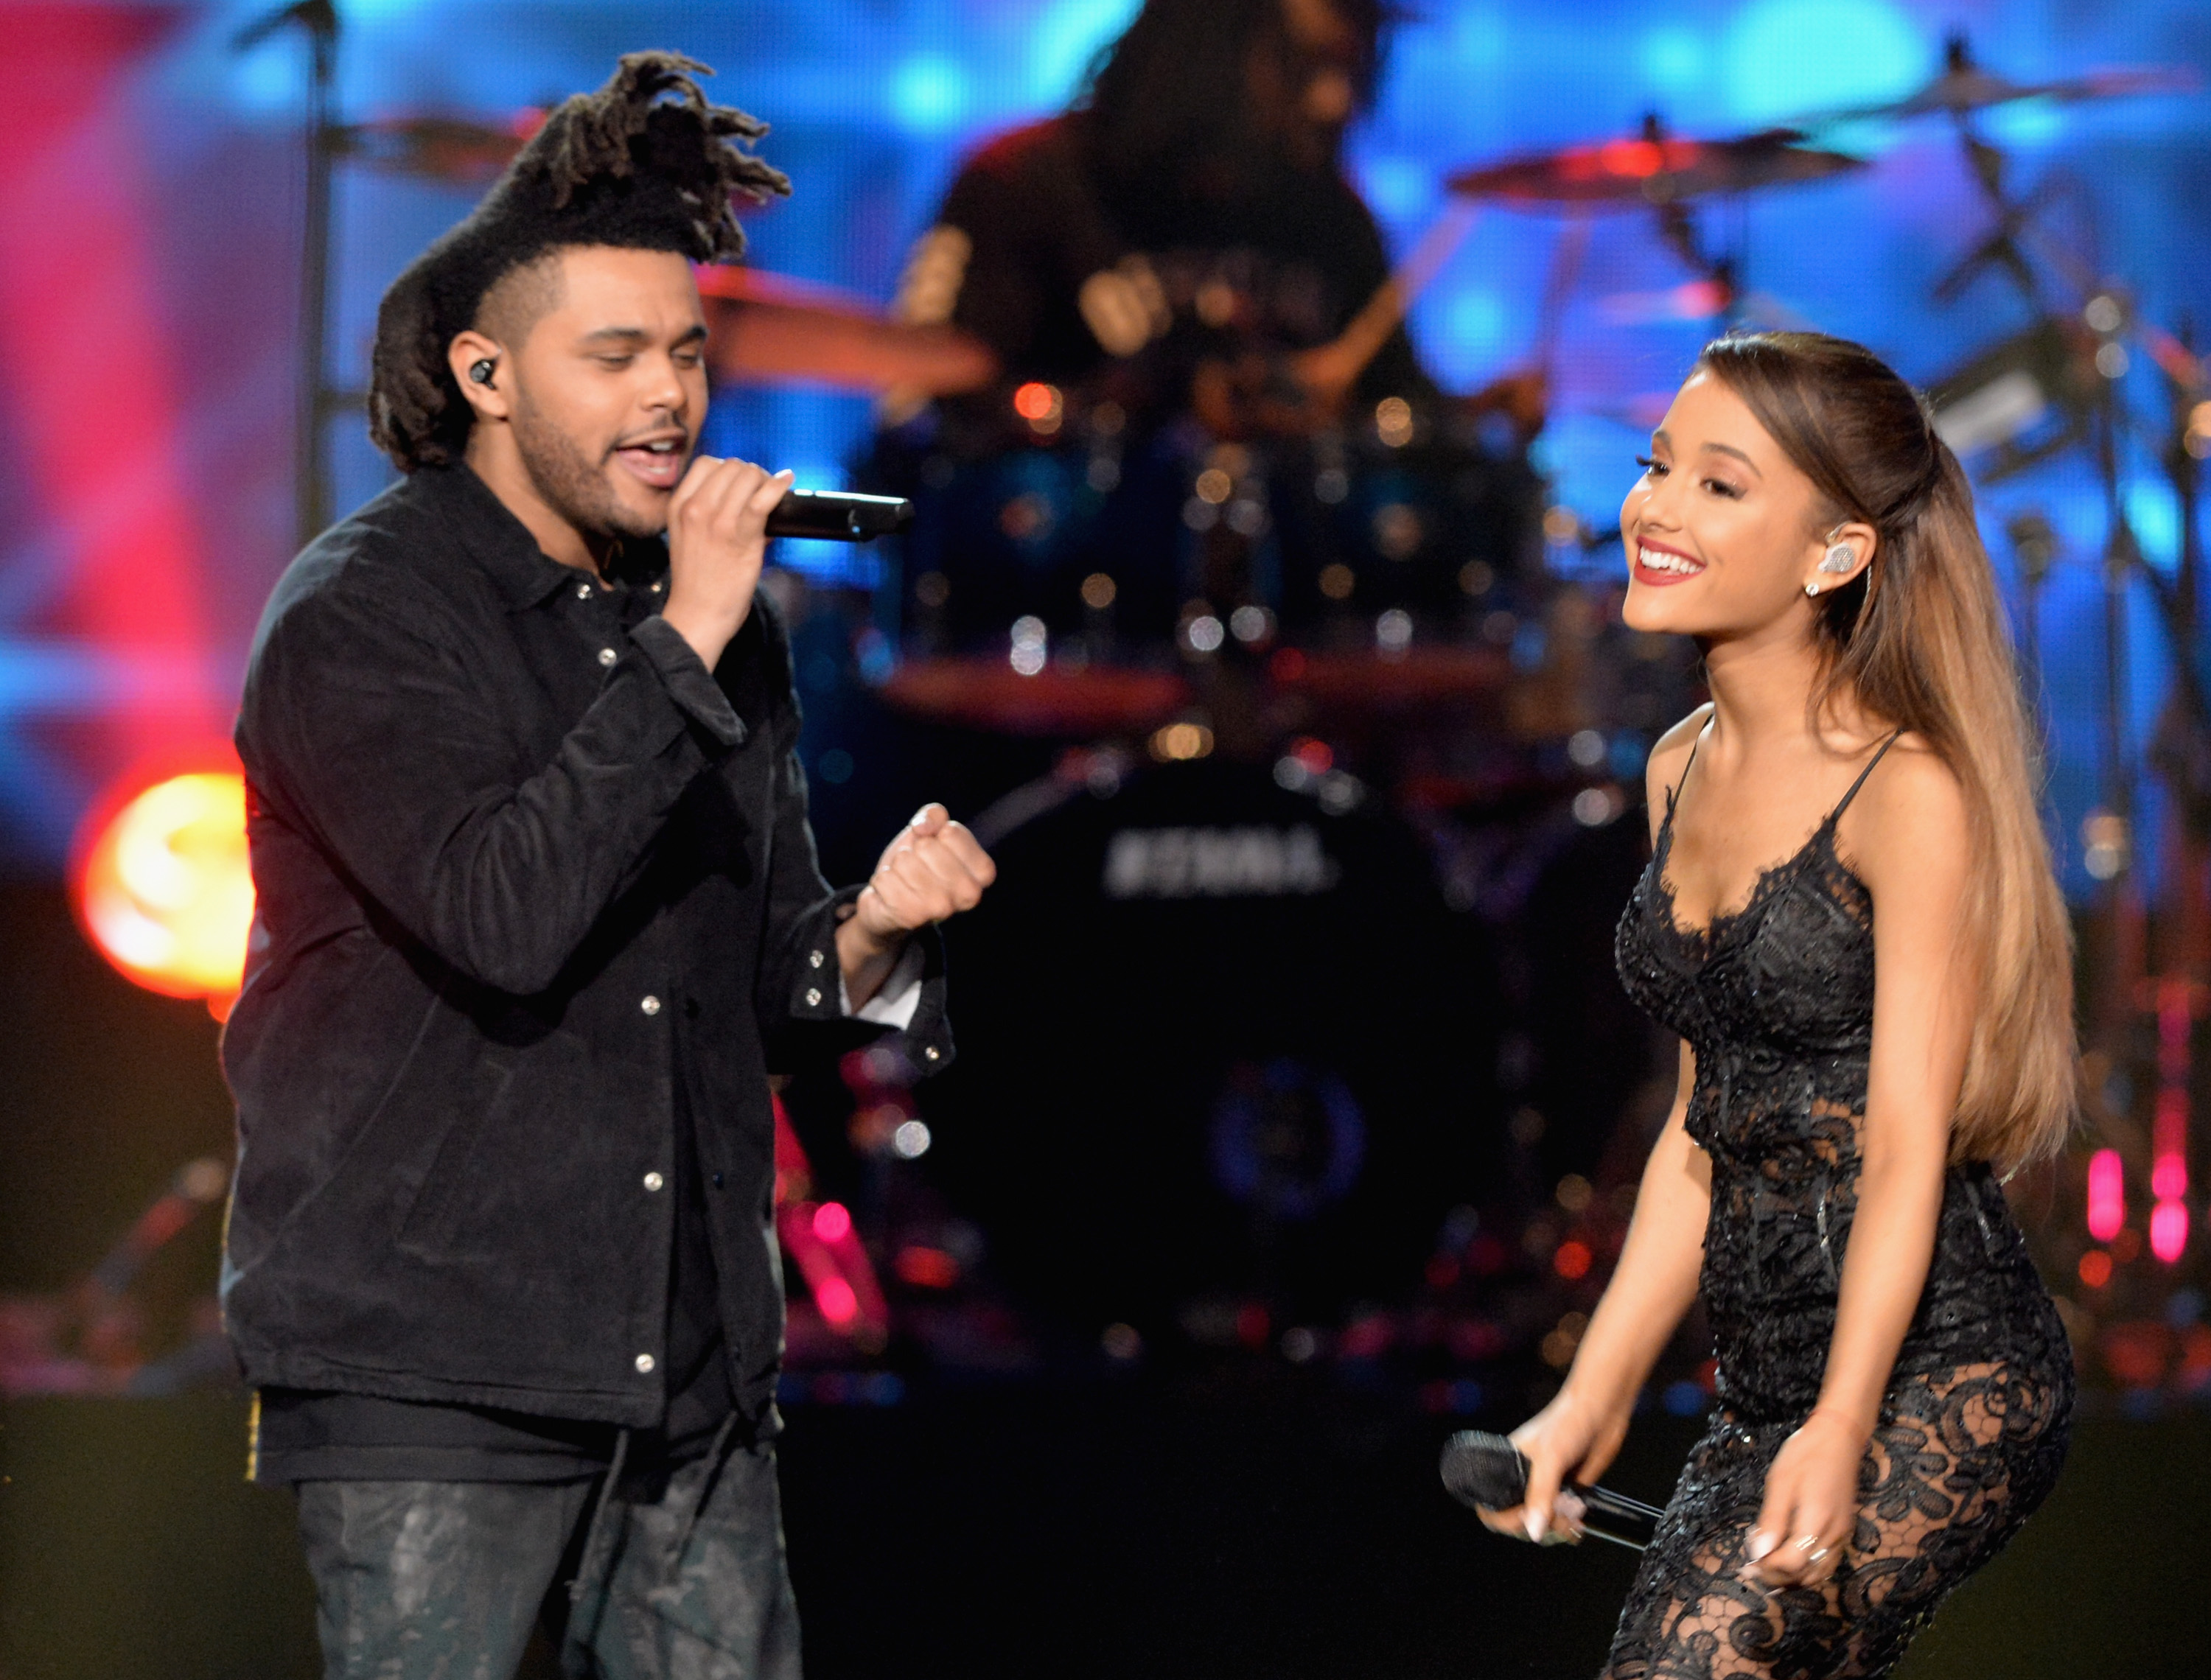 The Weeknd (L) and Ariana Grande perform onstage at the 2014 American Music Awards on November 23, 2014, in Los Angeles, California.